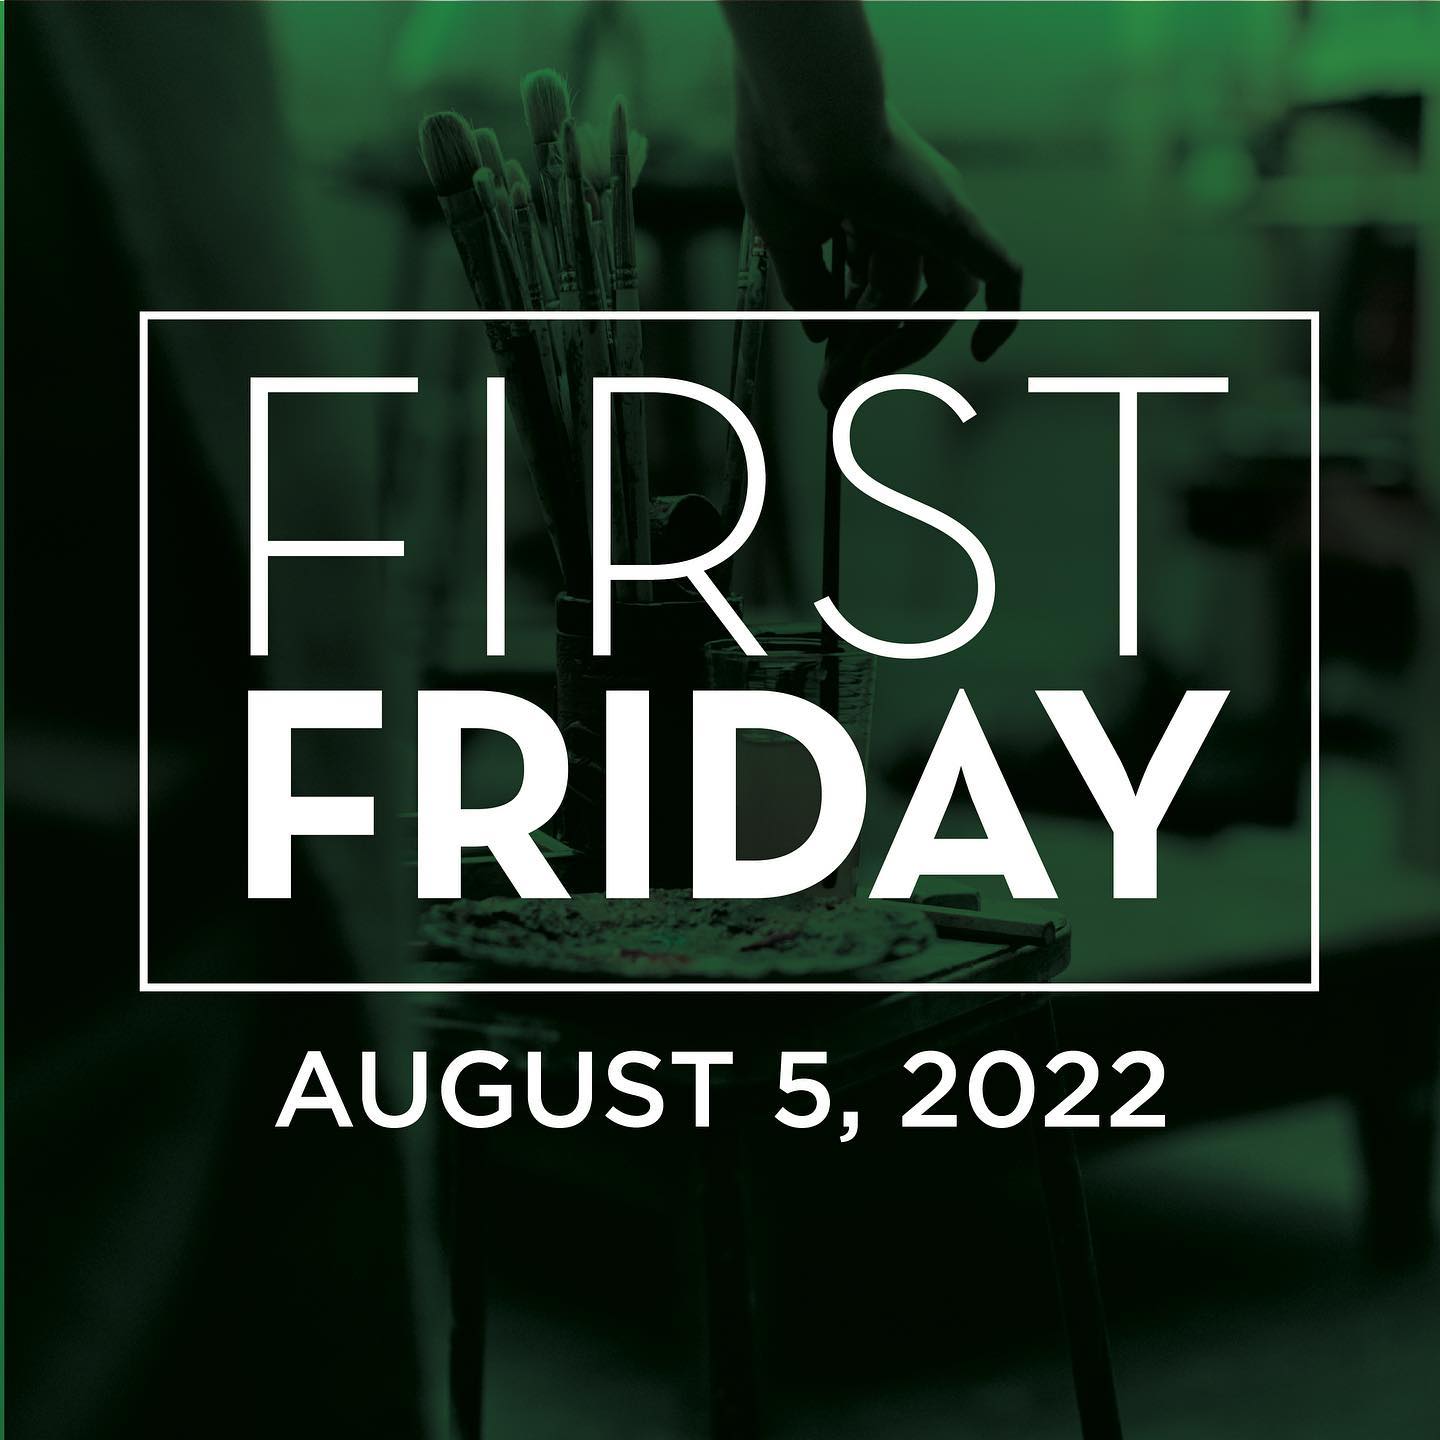 Join us around town during First Friday! Check out these PHX art destinations: 

Grand Avenue:
Plus 2 Group Exhibit at @five15arts Arts Chartreuse First Fridays at @hazelandviolet , First Friday at  @taikoarizona 

Roosevelt Row:
"Autonomy" Closing Reception, 20+ artists celebrating autonomy at @modified_arts_phx 
Summer Snacks @eyeloungephx , First Friday Open Studio - Mini Painting Activity for Ben's Bells Project,  FIRST FRIDAY: JERMAINE LOCKHART at @thenashjazz ,  Body Art and Image at @vertigo_phx 

Downtown: 
Discovering Desert Diversity – A SAQA Arizona Regional Exhibition 
 @heardmuseum Herberger Theater Center. 
Uptown / Midtown:
 FF @heardmuseum Candle in the Wind Night – The Elton John Experience @brightsidestudiosphx Studios.

FF @phxart Art Museum has MOVED to Saturday for the month of August. 

Phoenix Airport Museum:
 Cast and Flame: Glass Art by Jennifer Caldwell and Jason Chakravarty, Western Perception, Earth and Sky, Phoenix Sister Cities: Celebrating 50 Years of Cultural Exchange, Psyche: Mission to a Metal World and Persistent Plants & Desert Dwellers: Arizona's Flora and Fauna.

#artlinkphx #firstfridayphx #artistsaz #azart #azartgalleries